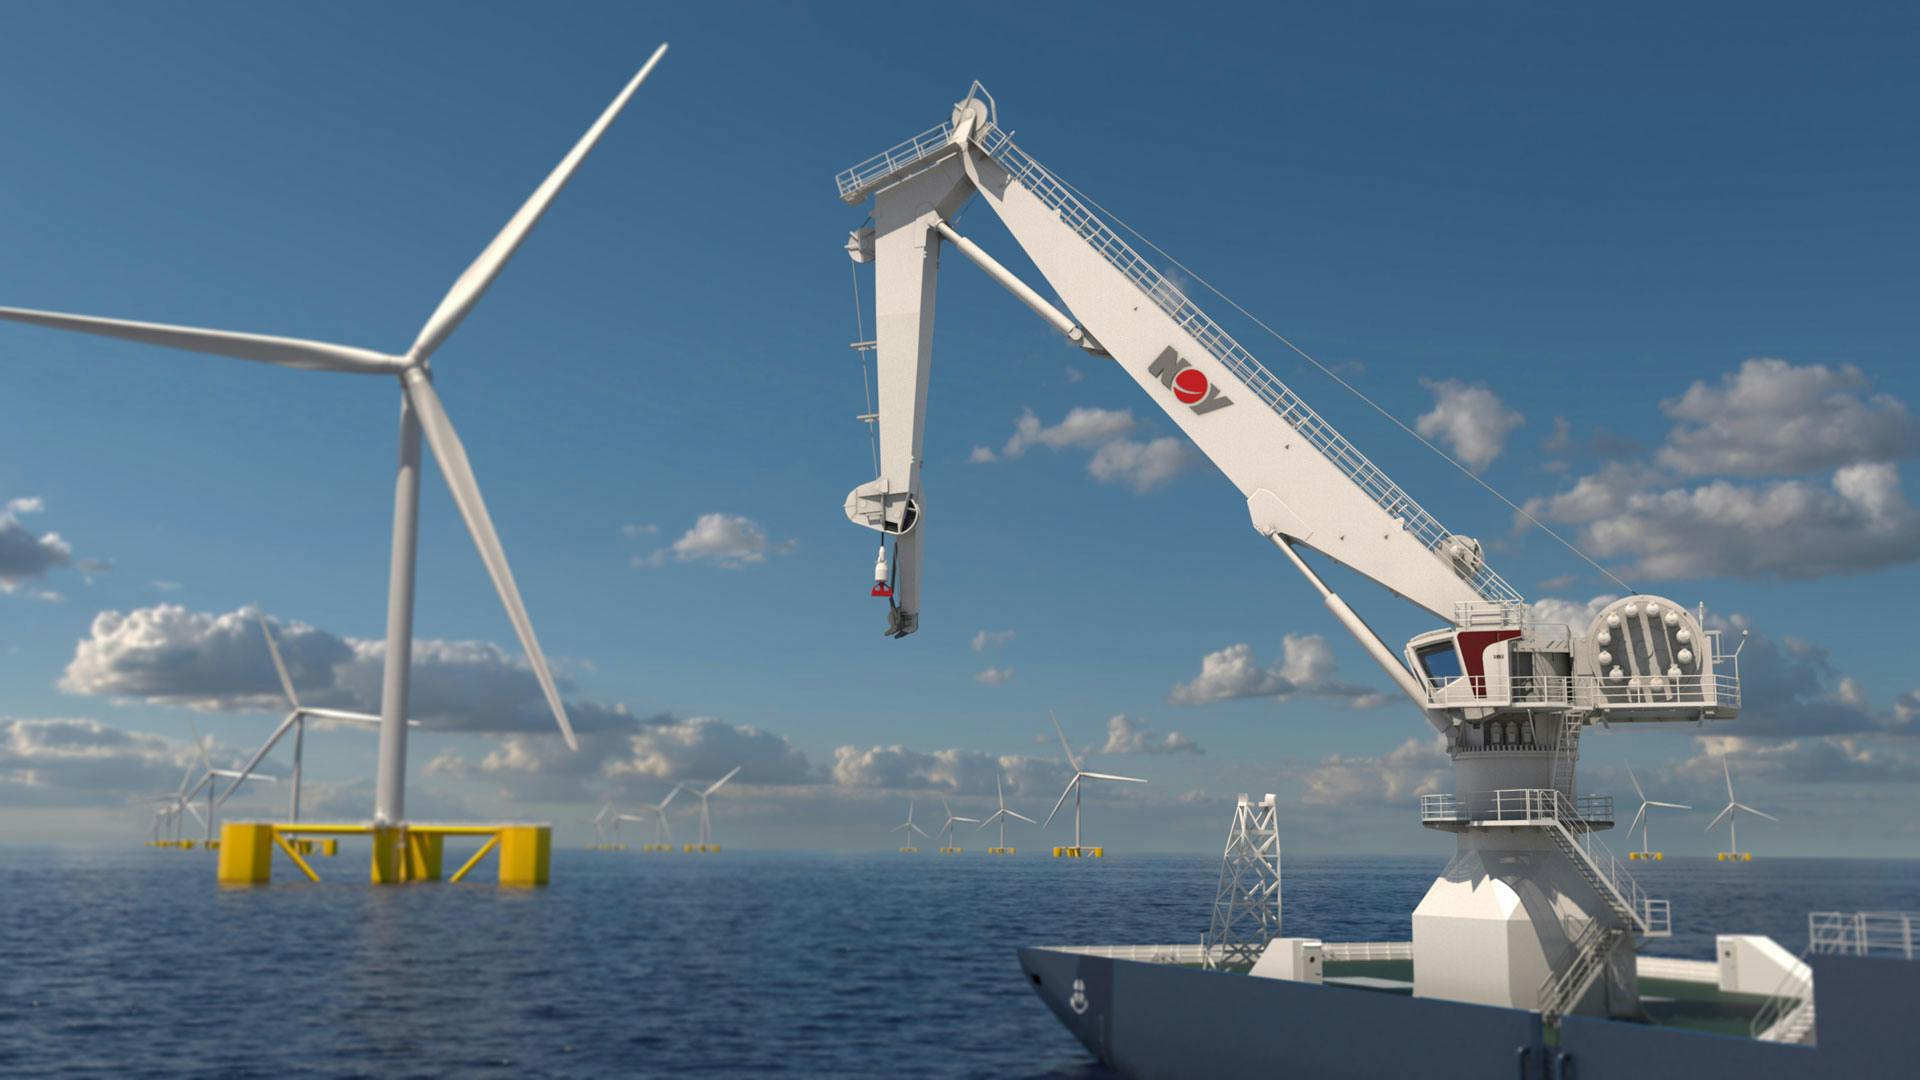 Render of an offshore electrical crane with wind turbines in the background